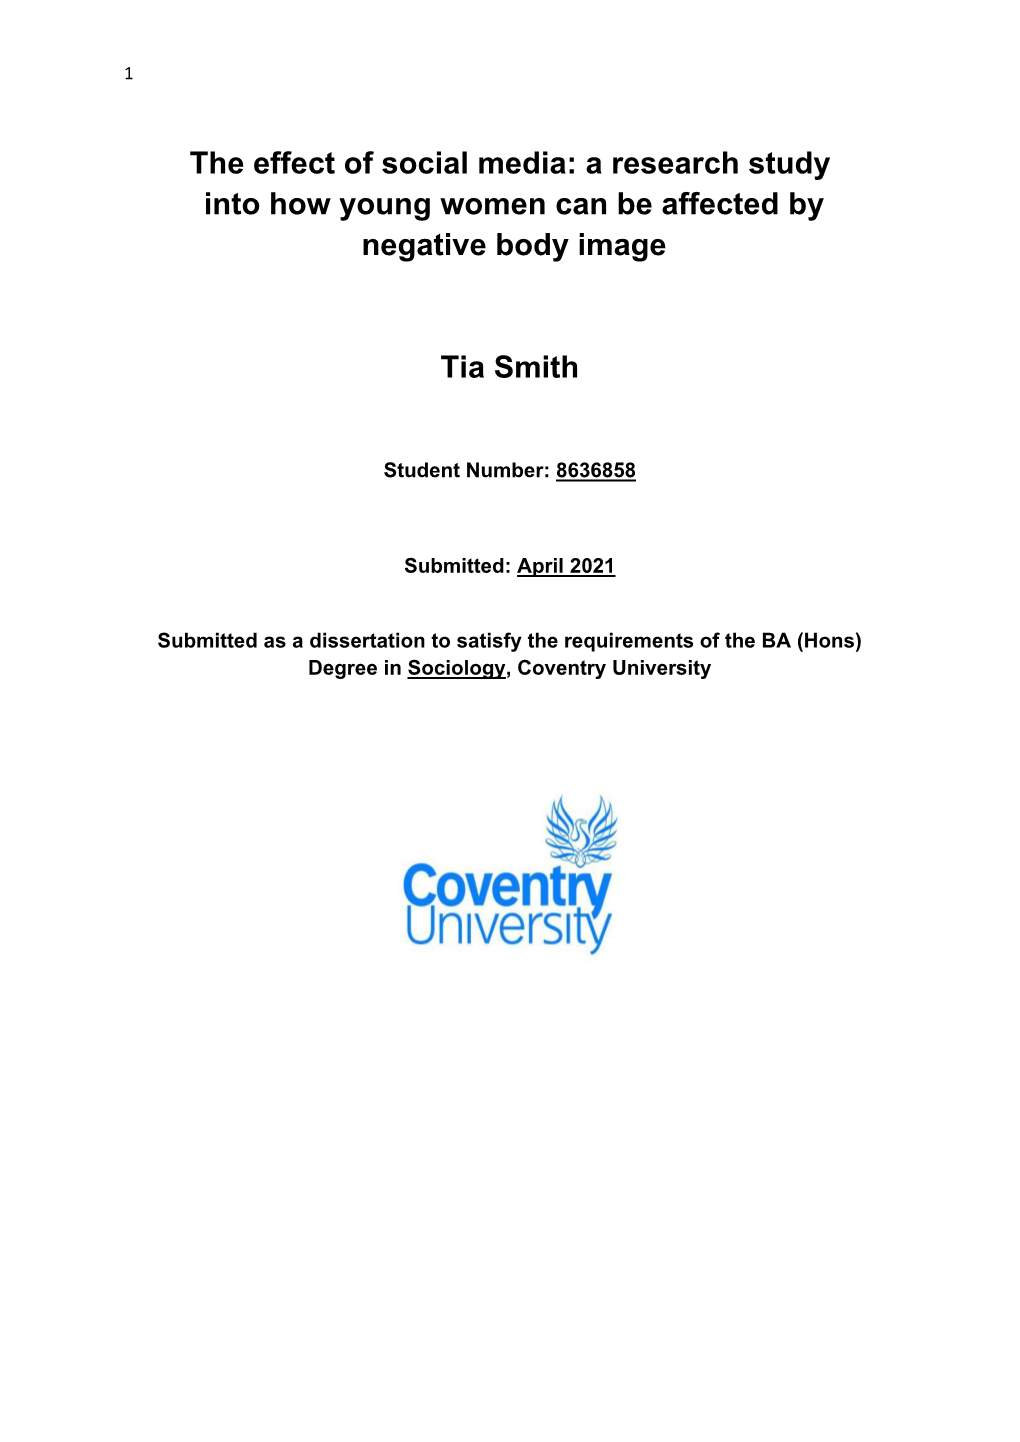 The Effect of Social Media: a Research Study Into How Young Women Can Be Affected by Negative Body Image